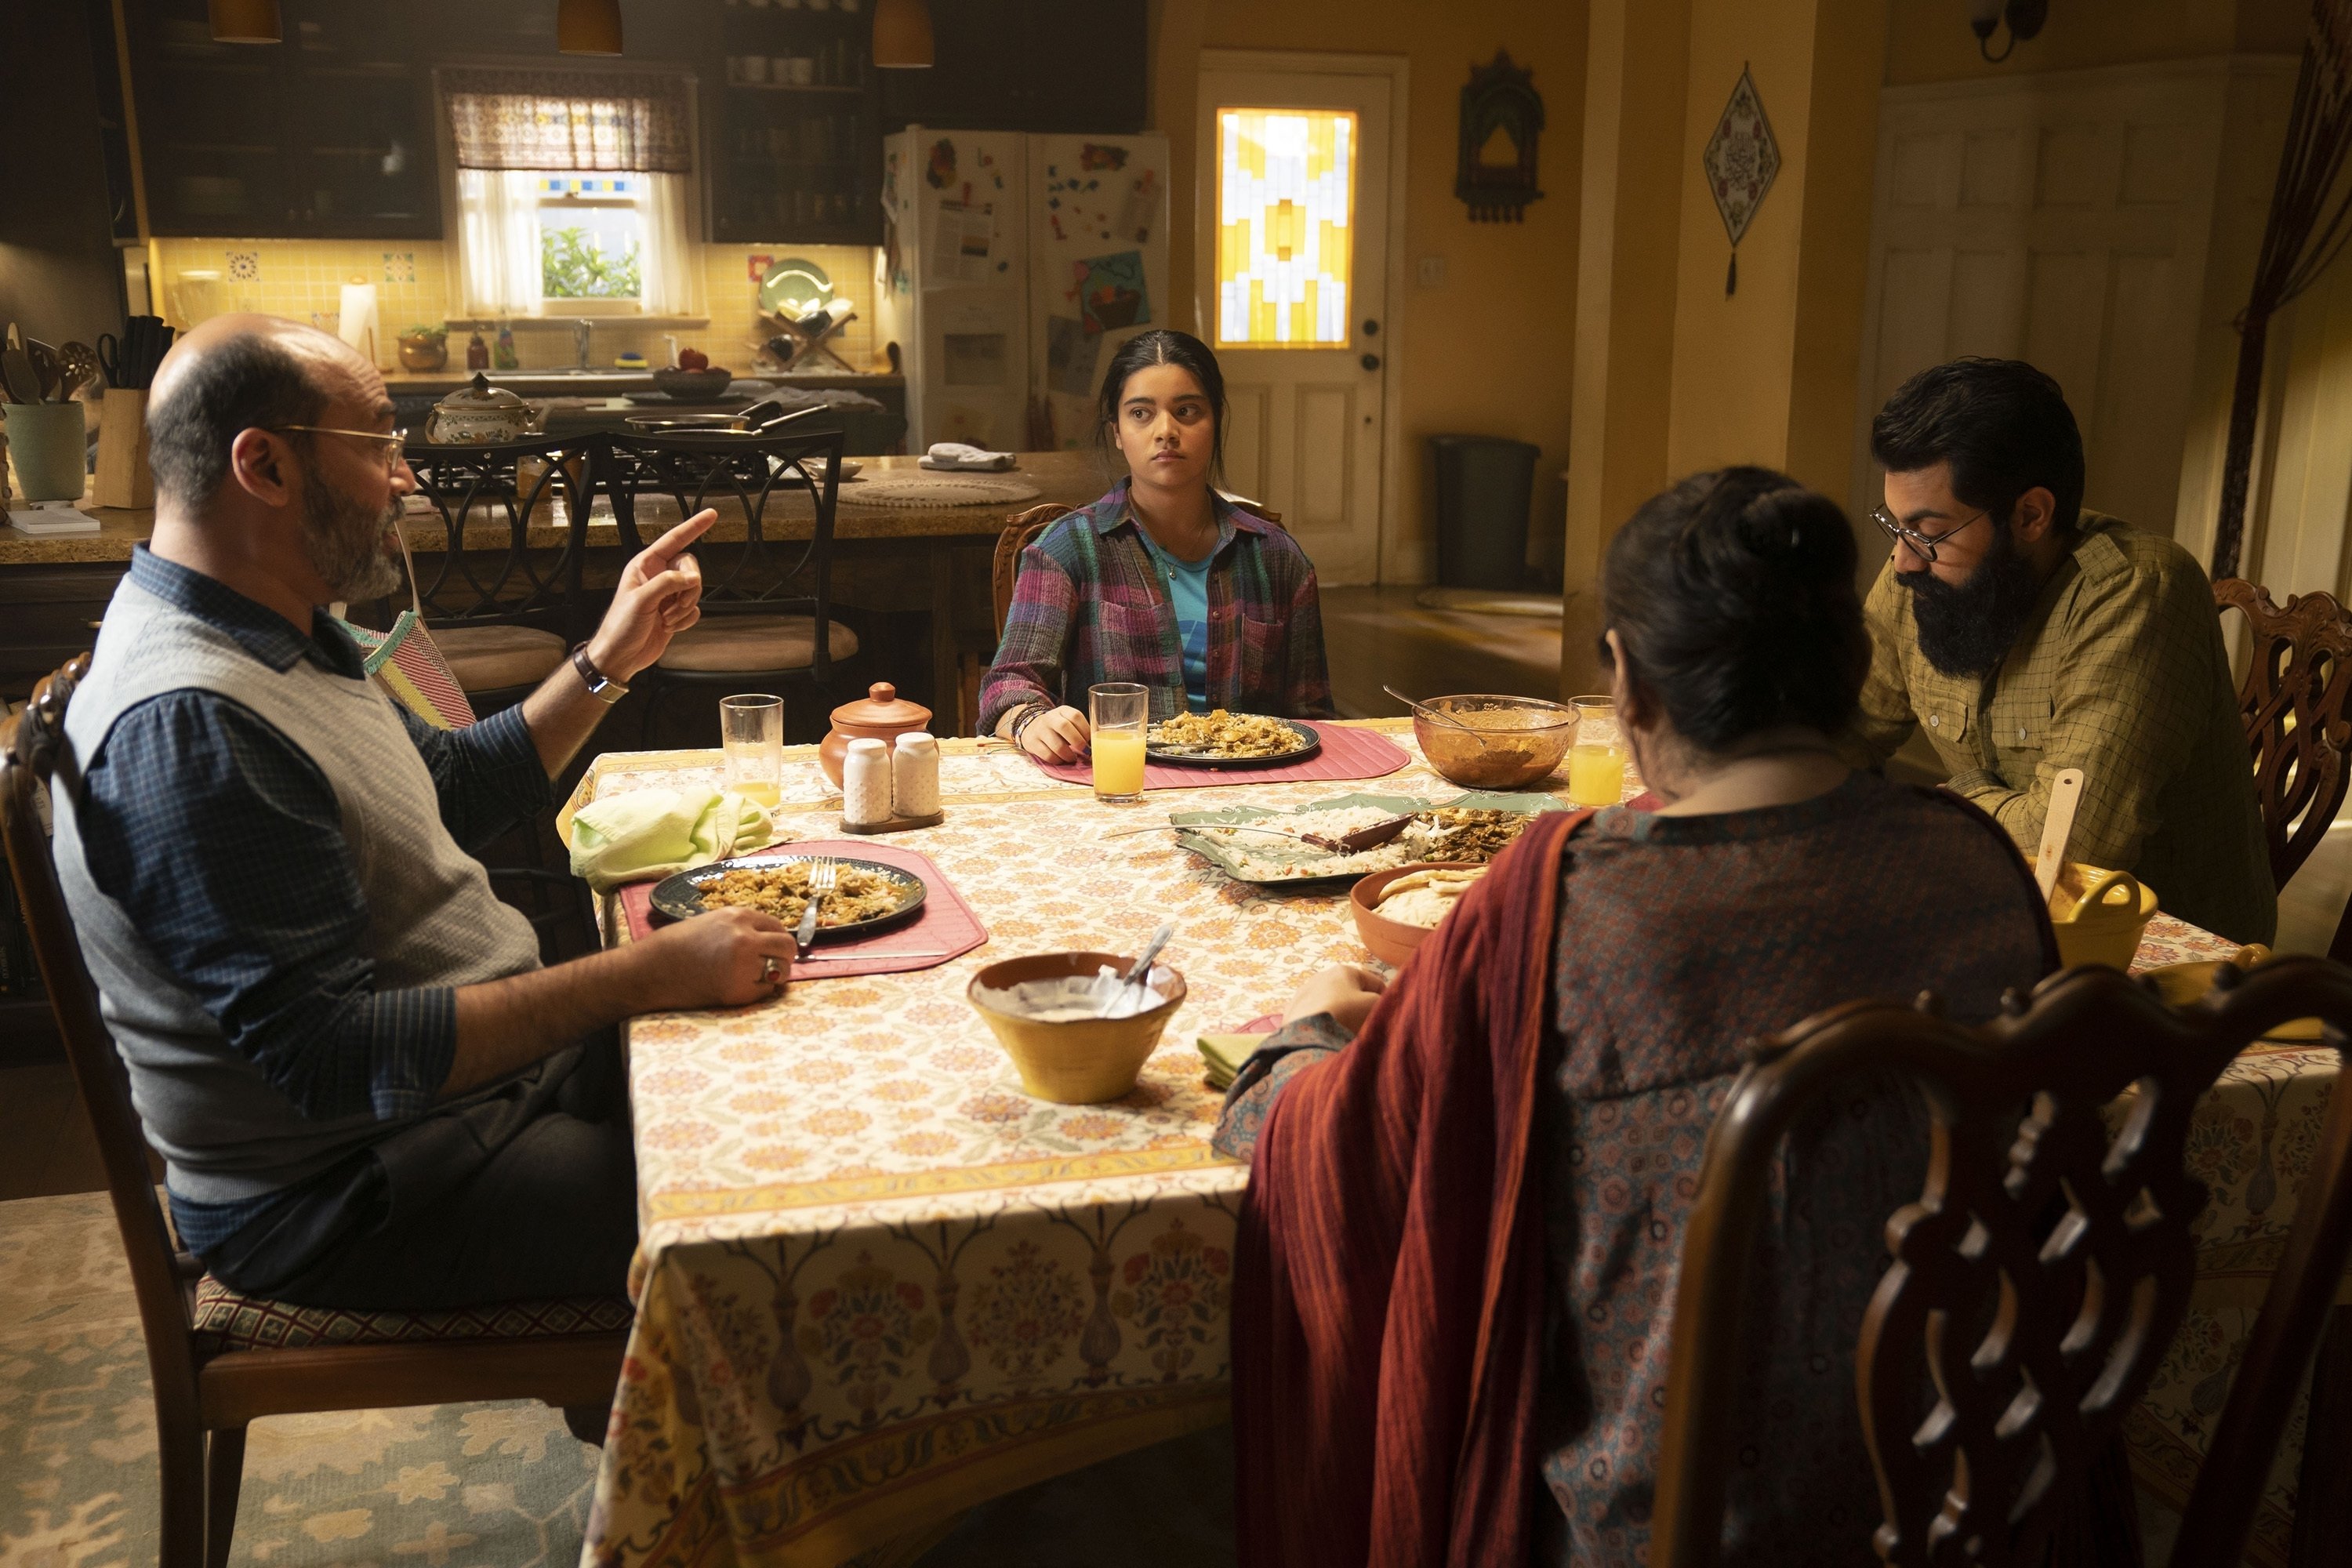 This image released by Disney shows, from left, Mohan Kapur, Iman Vellani, Nimra Bucha and Saagar Shaikh in a scene from the series 